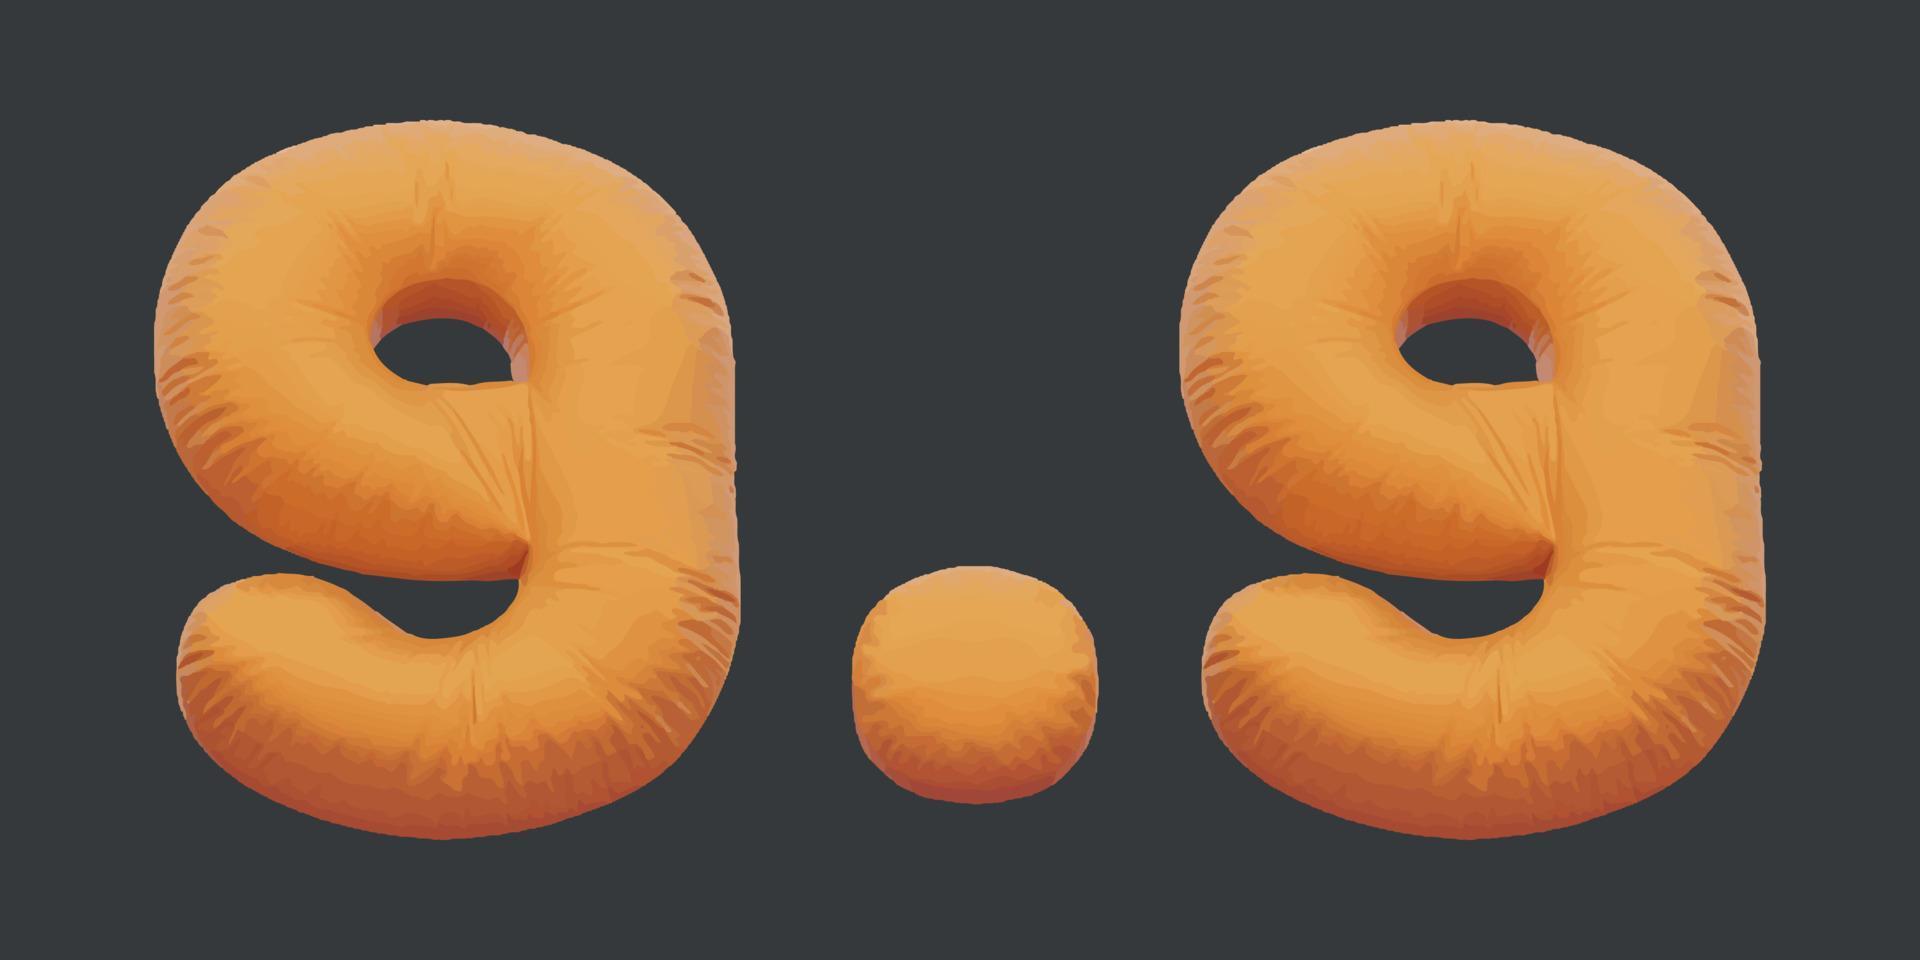 9.9 sale golden inflatable Helium foil numbers bread balloons style. vector illustration eps10